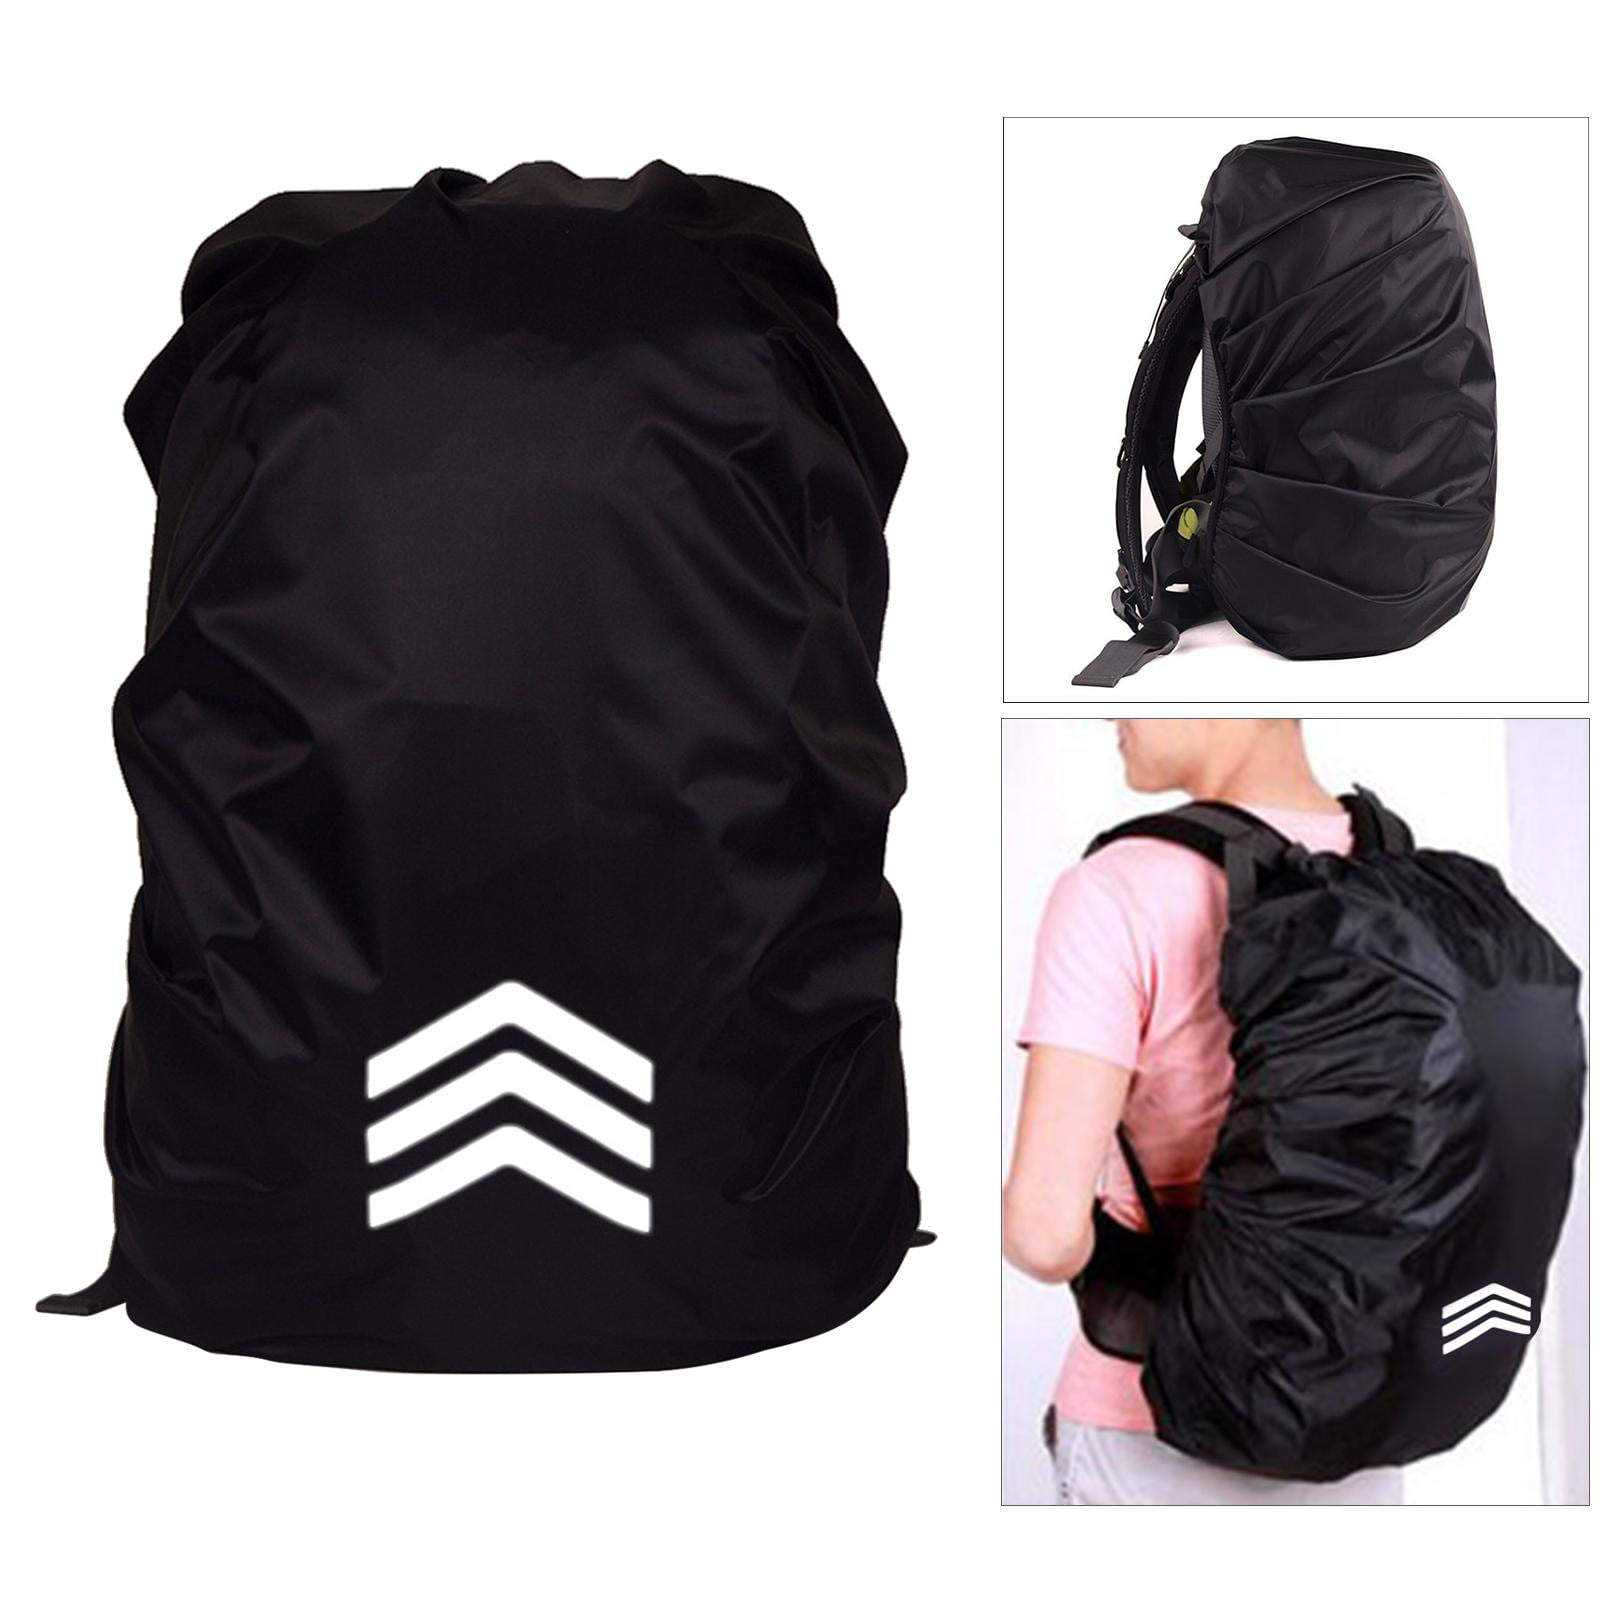 Safety Set Of Two Reflective Backpack Cover For Cycling/ Outdoor Activity 